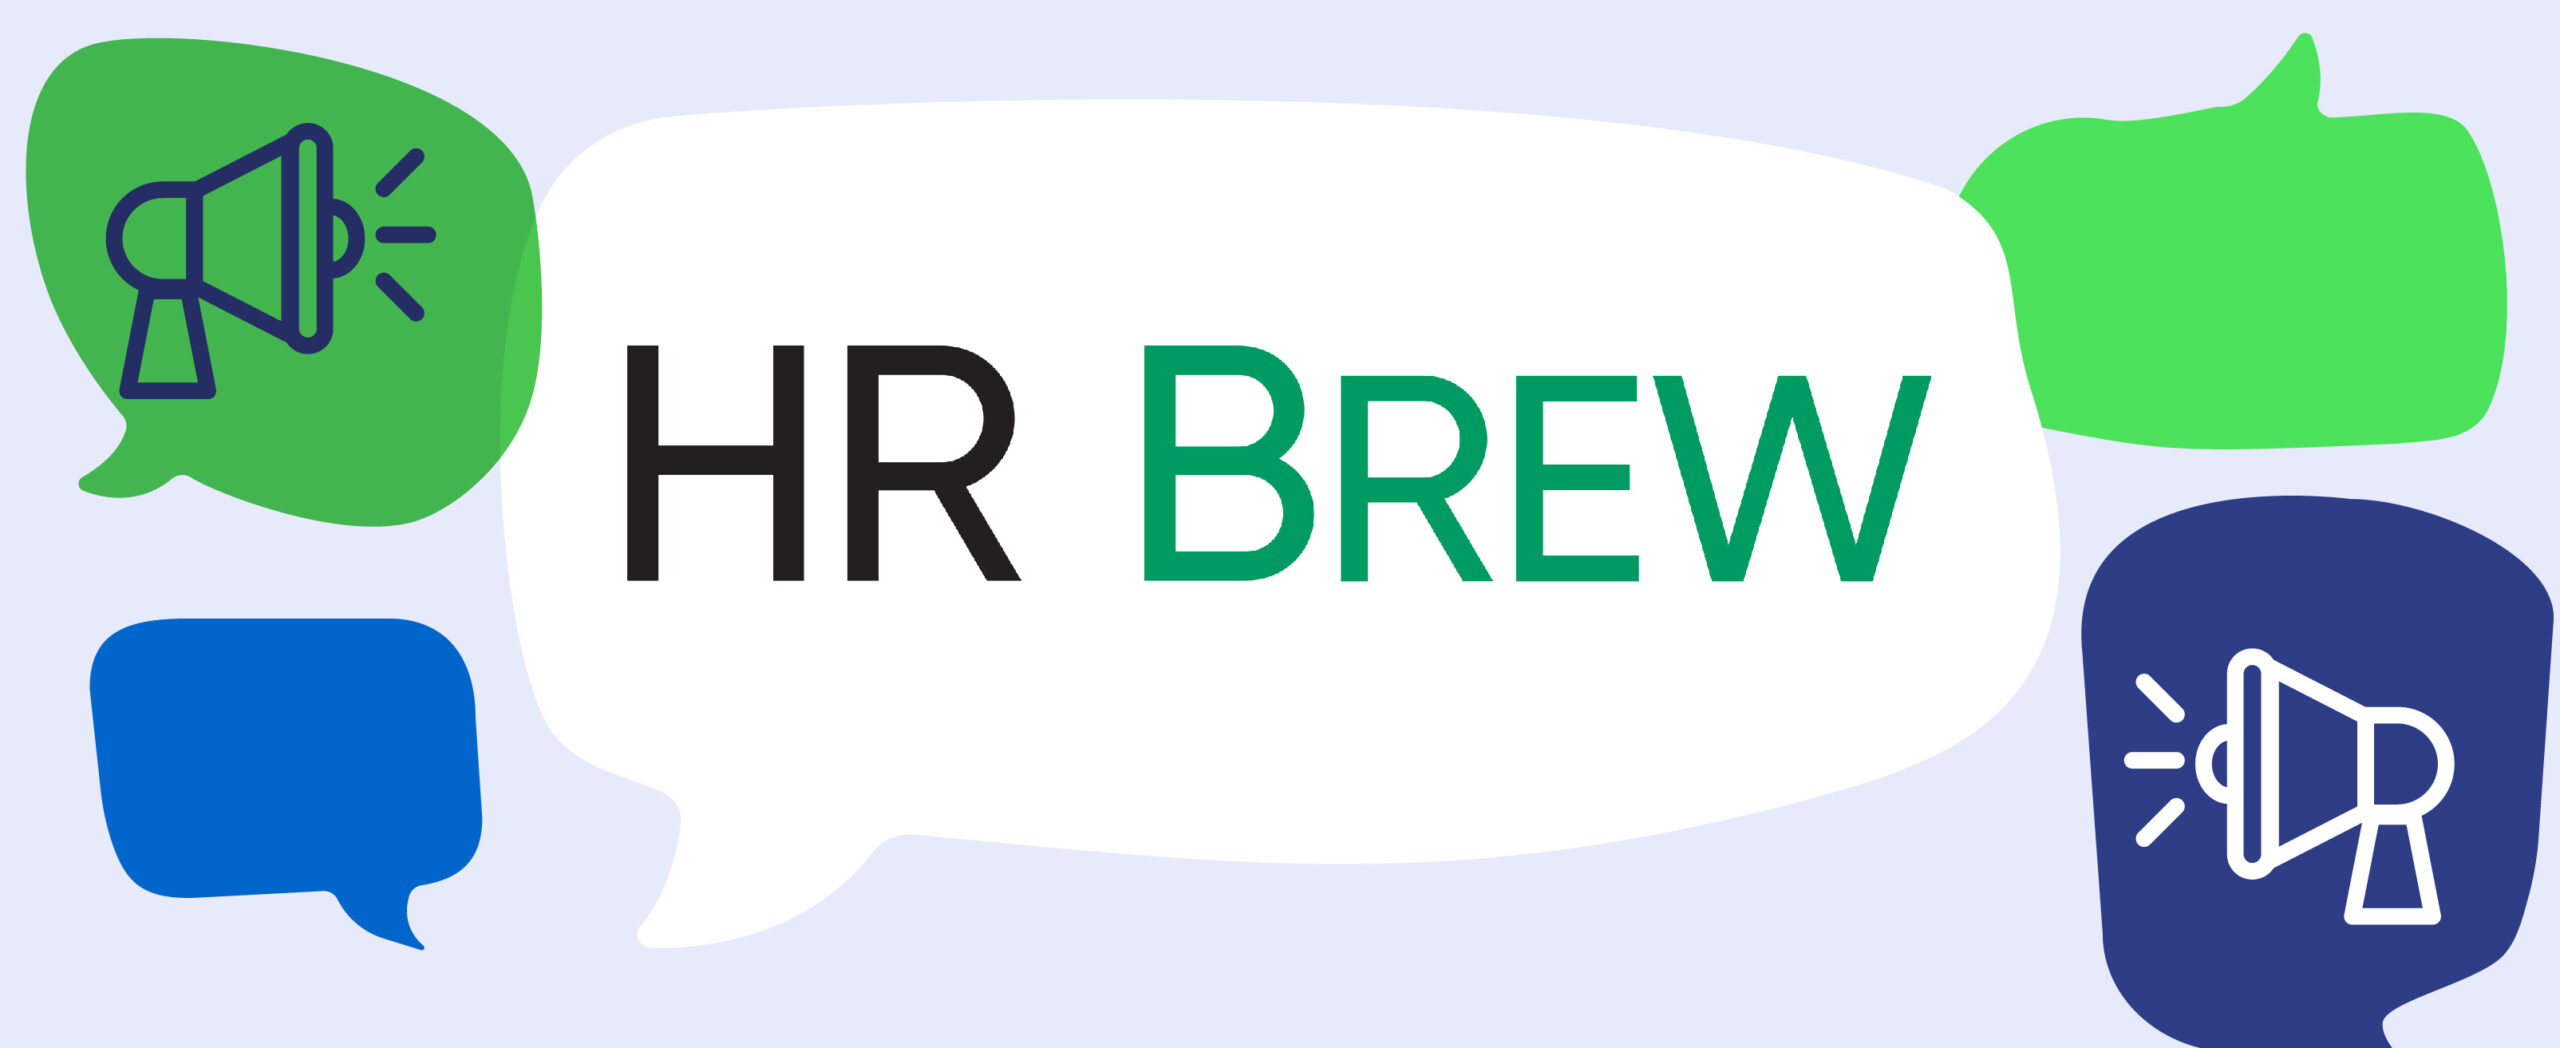 HR Brew: Disability:IN launches new career accelerator program for disabled professionals